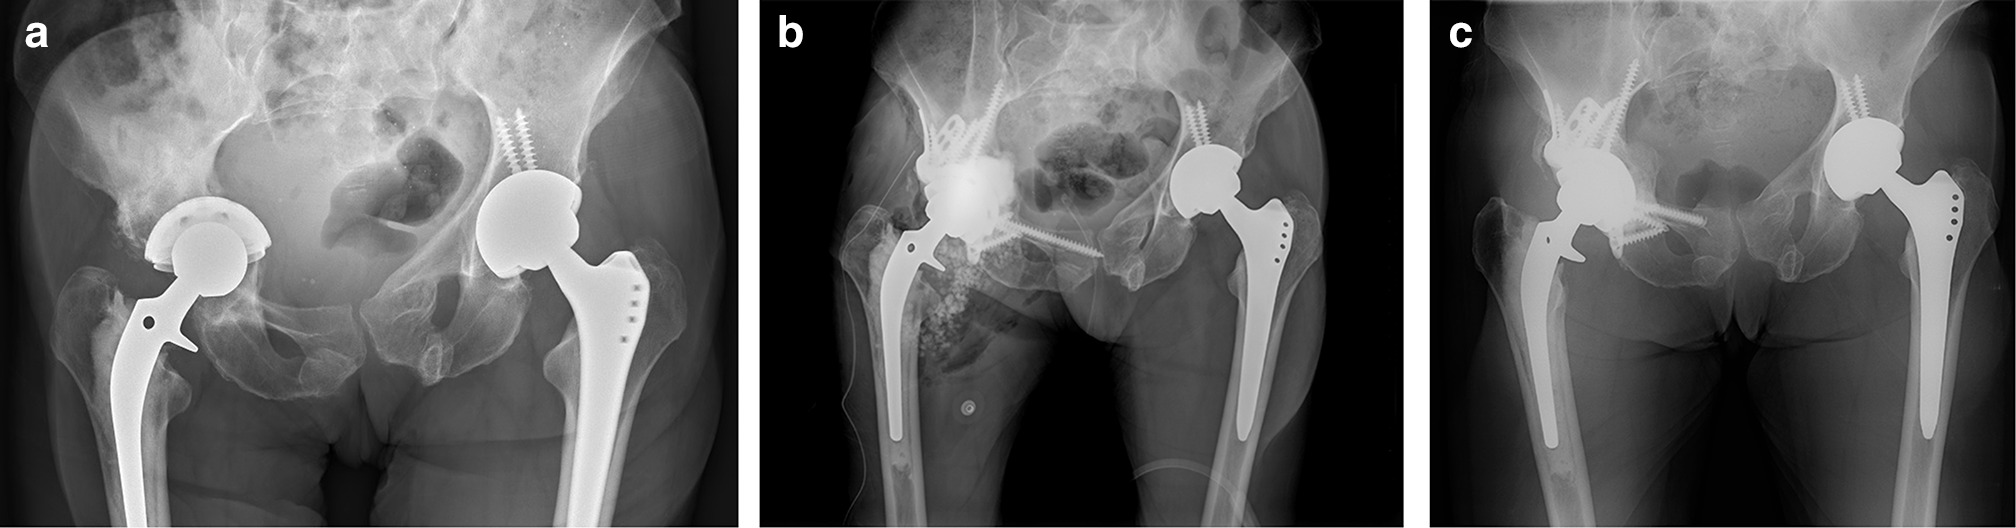 Fig. 1 
          a) Anteroposterior (AP) pelvic radiograph of a 75-year-old female with a painful, aseptically loose right revision acetabular component showing protrusion of right cementless porous cup (prior cemented cup). CT scan showed segmental bone loss of anterior column and medial quadrilateral plate. b) Postoperative AP pelvic radiograph showing pelvic reconstruction with MaxTi triflange cage. 18 ml of Cerament was injected behind the cage into all defects before cementing the acetabular component into the cage. c) AP pelvic radiograph 16 months postoperatively. Pelvic reconstruction remains stable. Note the area of Cerament where remodelling has occurred. Remodelling has progressed to an appearance that suggests transformation into bone. Also note the removal of 15 mm of superior ramus screw tip which exited the anterior cortex and was a focal area of discomfort when wearing pants. The exposed screw was removed at 14 months postoperatively with a limited incision.
        